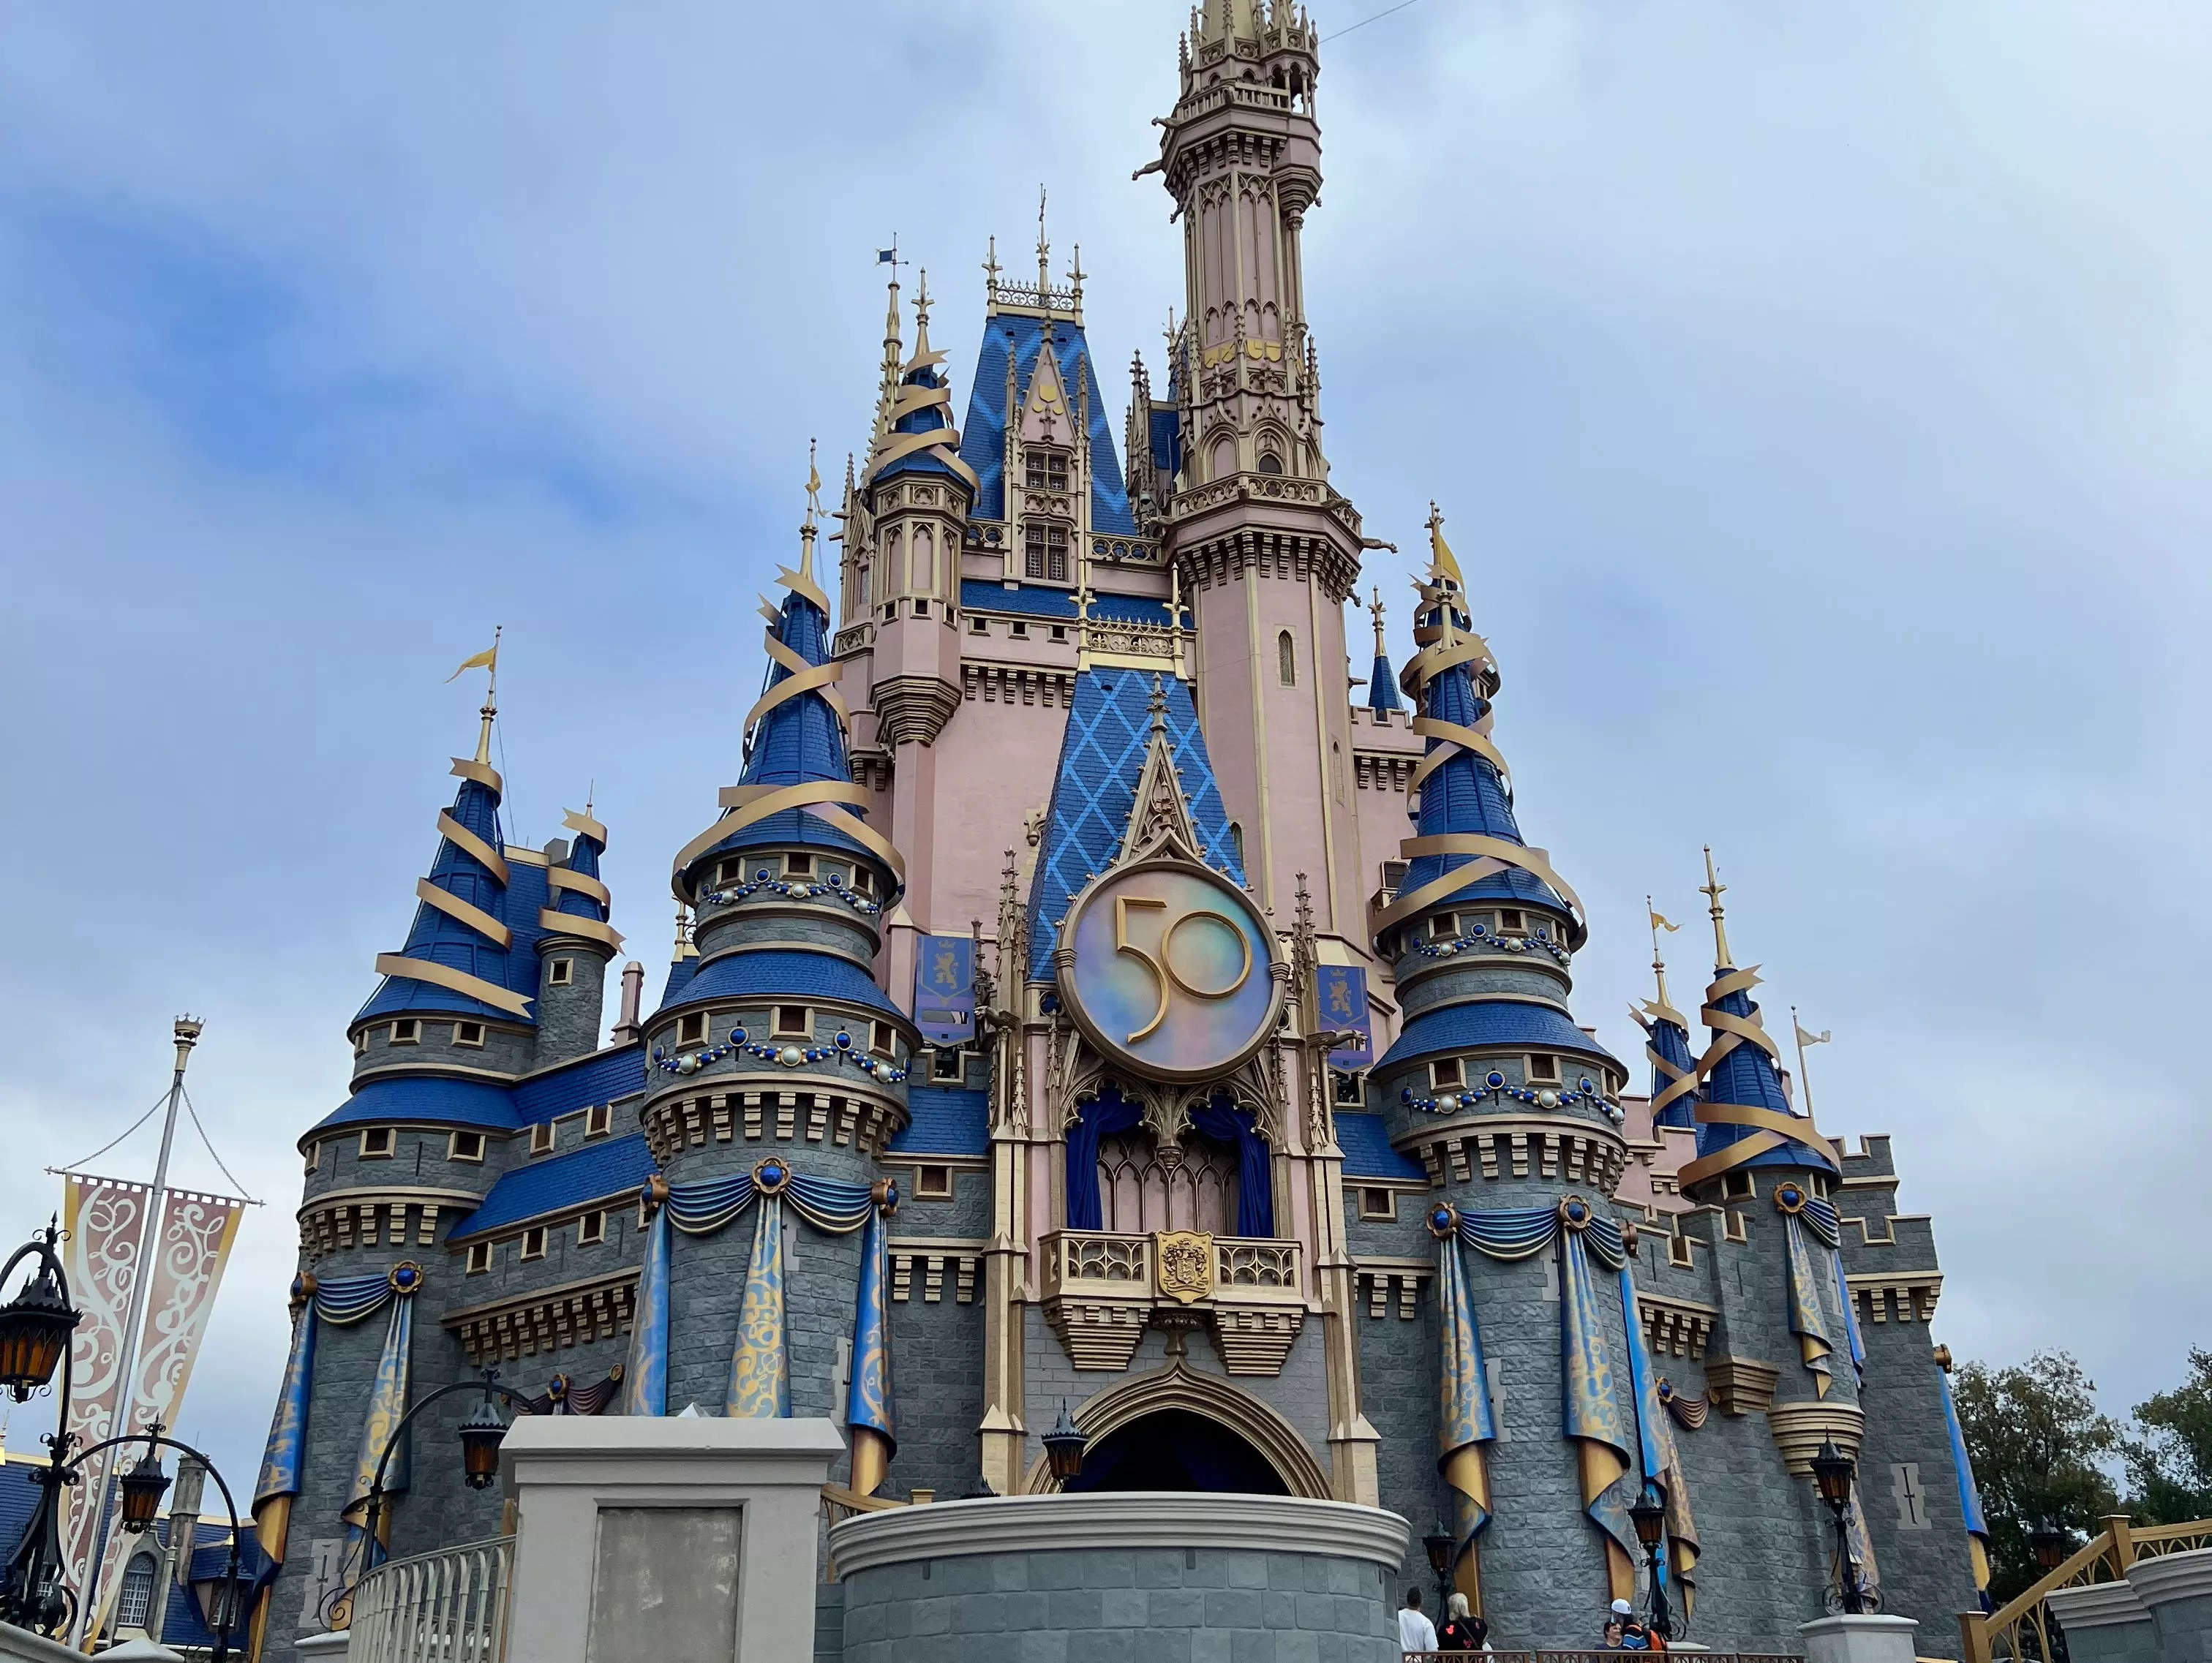 cinderella castle decorated for the 50th anniversary celebration at disney world